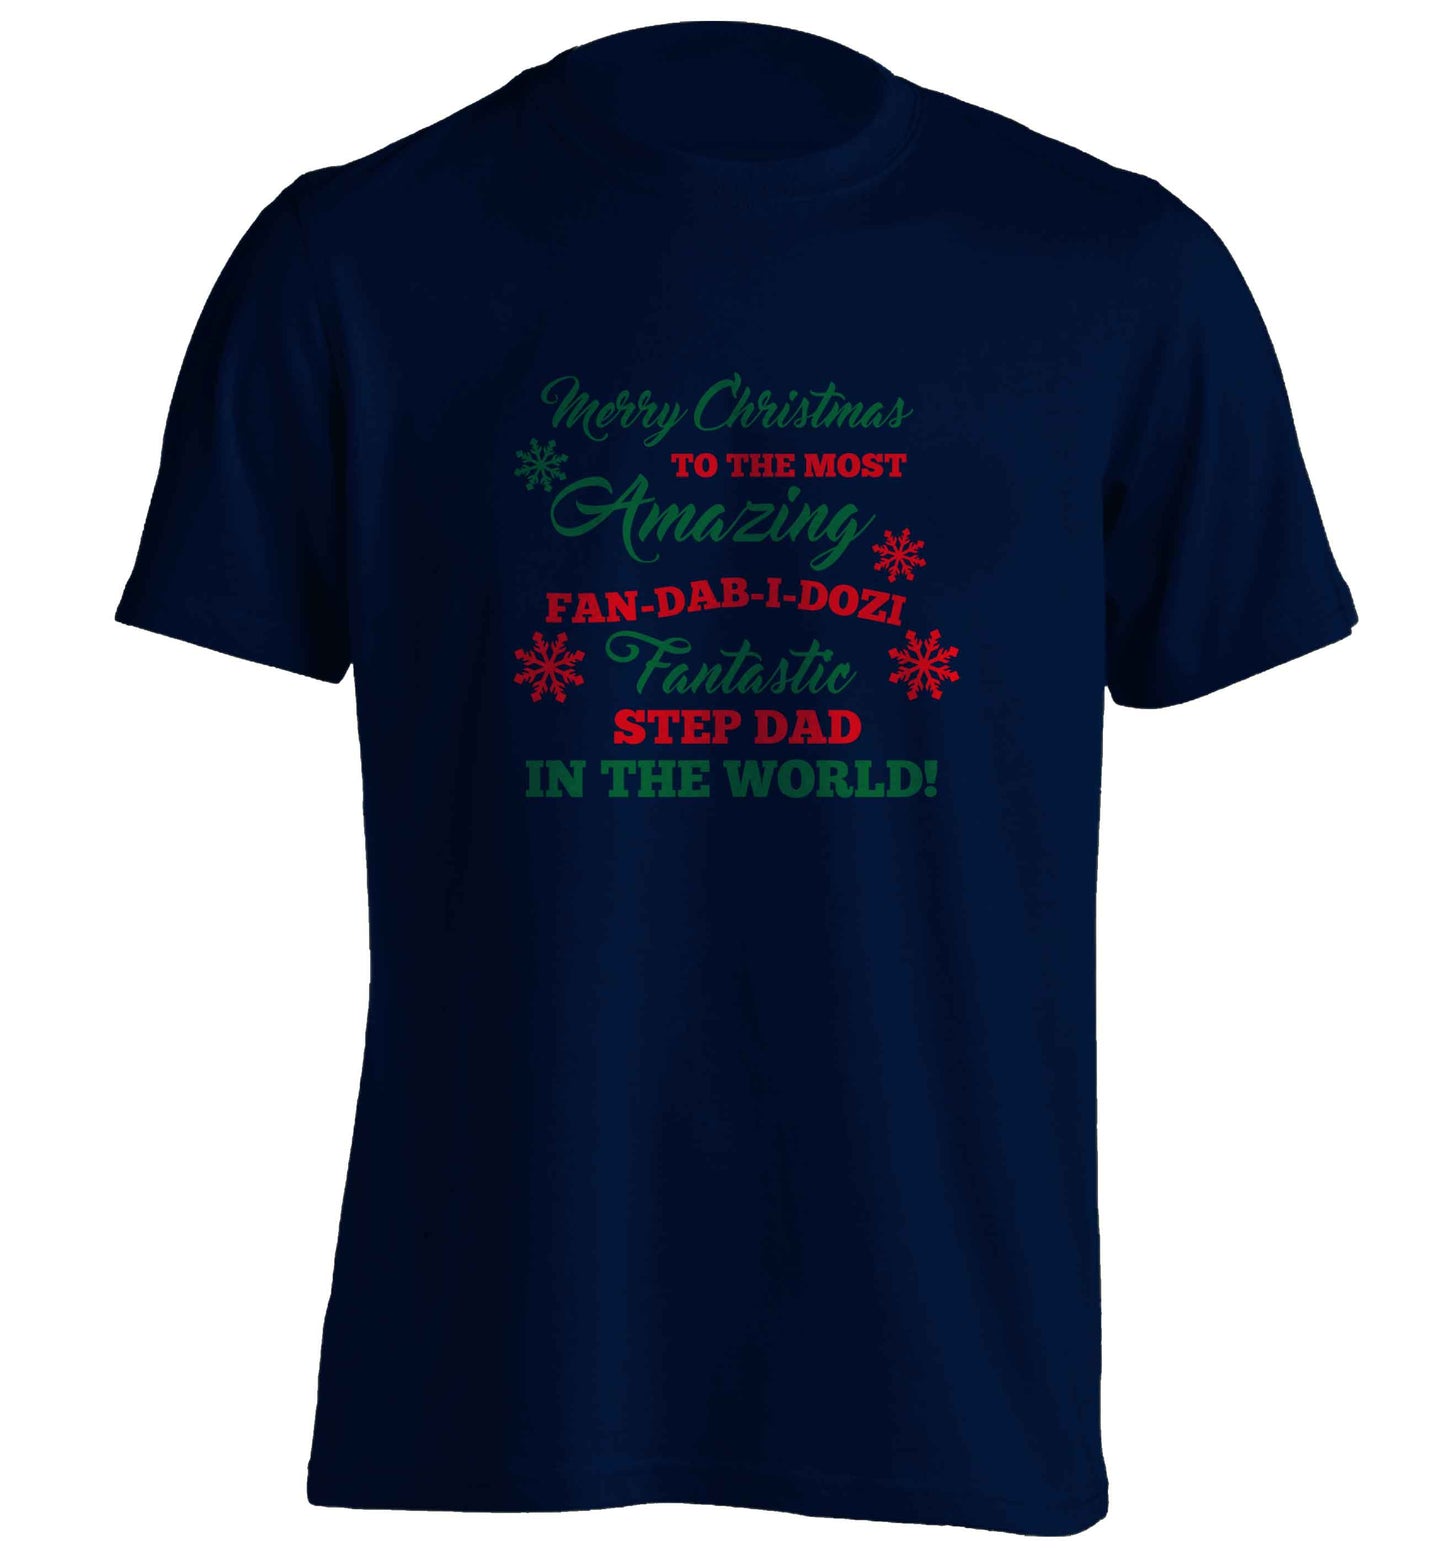 Merry Christmas to the most amazing fan-dab-i-dozi fantasic Step Dad in the world adults unisex navy Tshirt 2XL